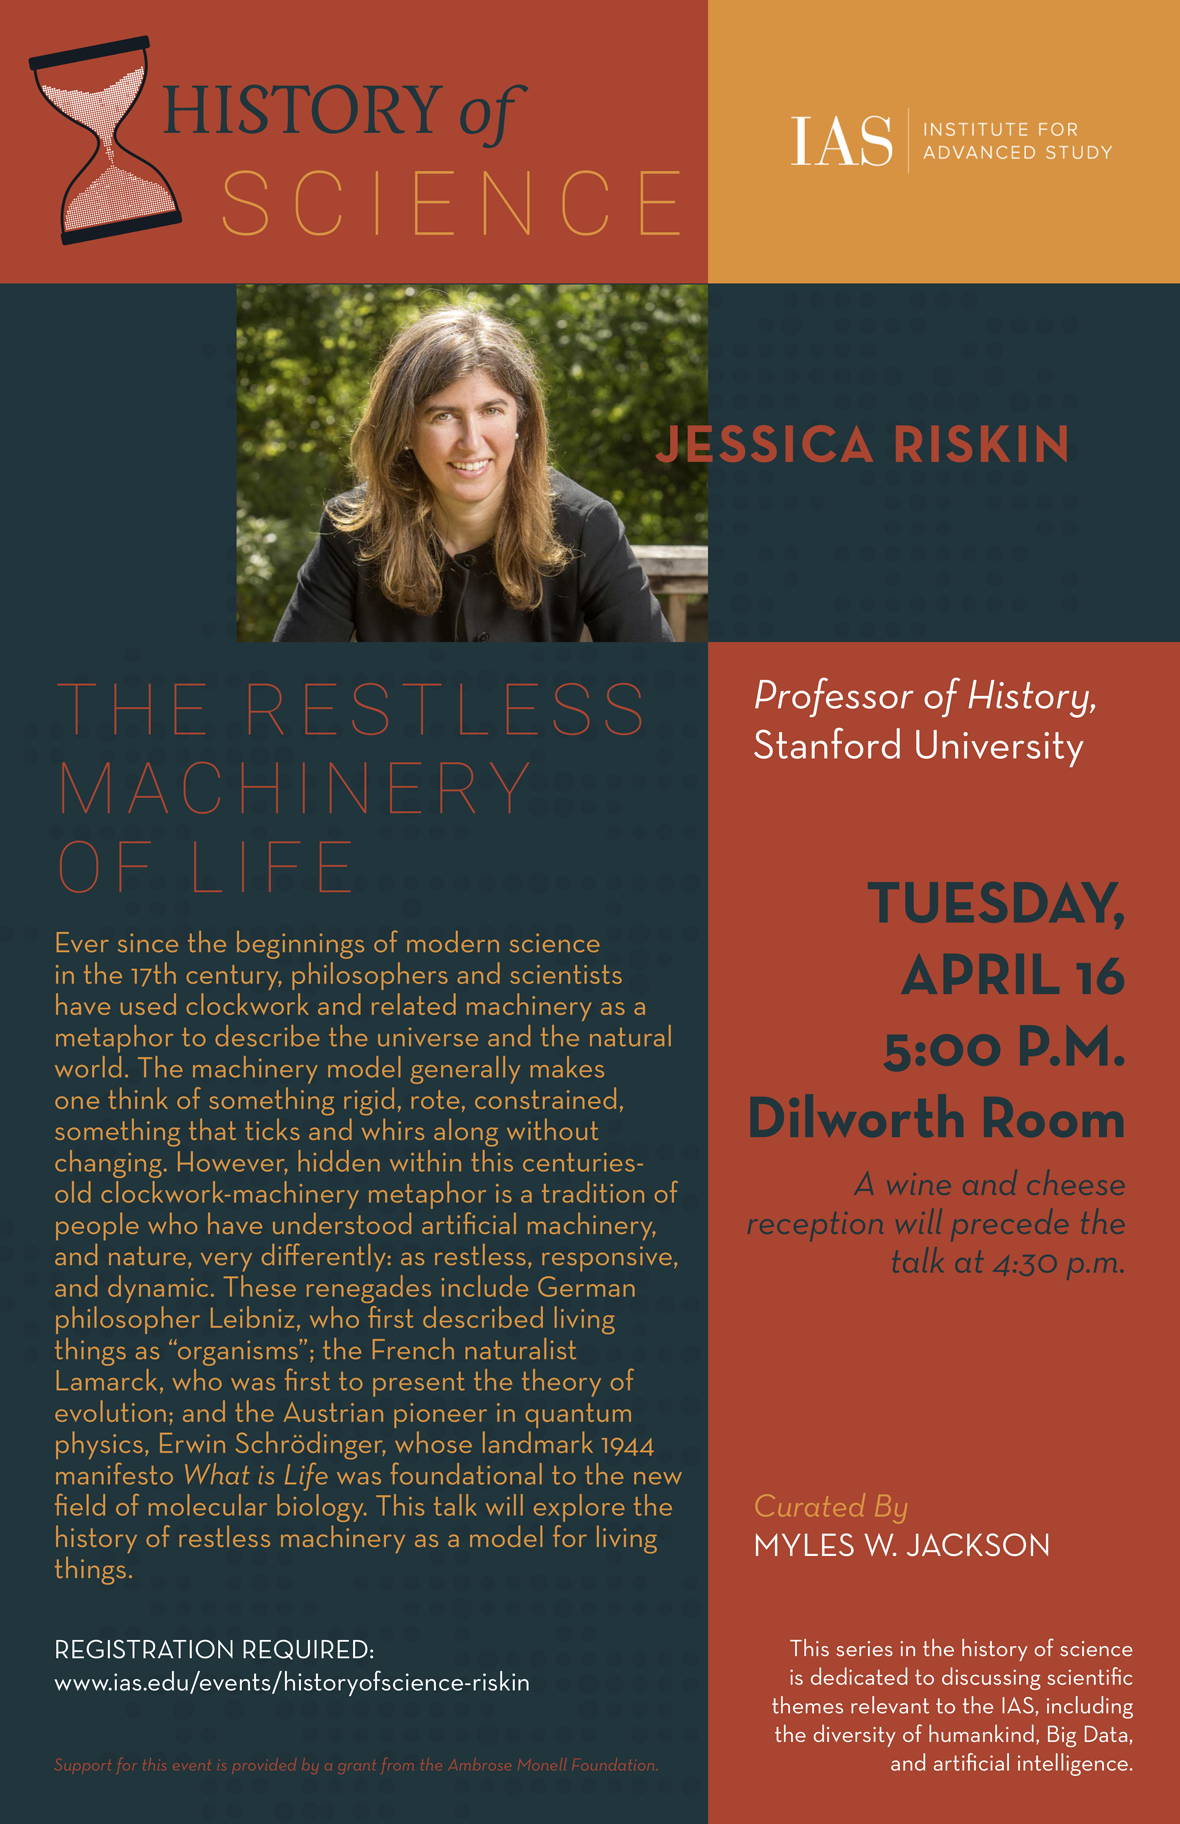 History of Science Lecture with Jessica Riskin - Events | Institute for ...